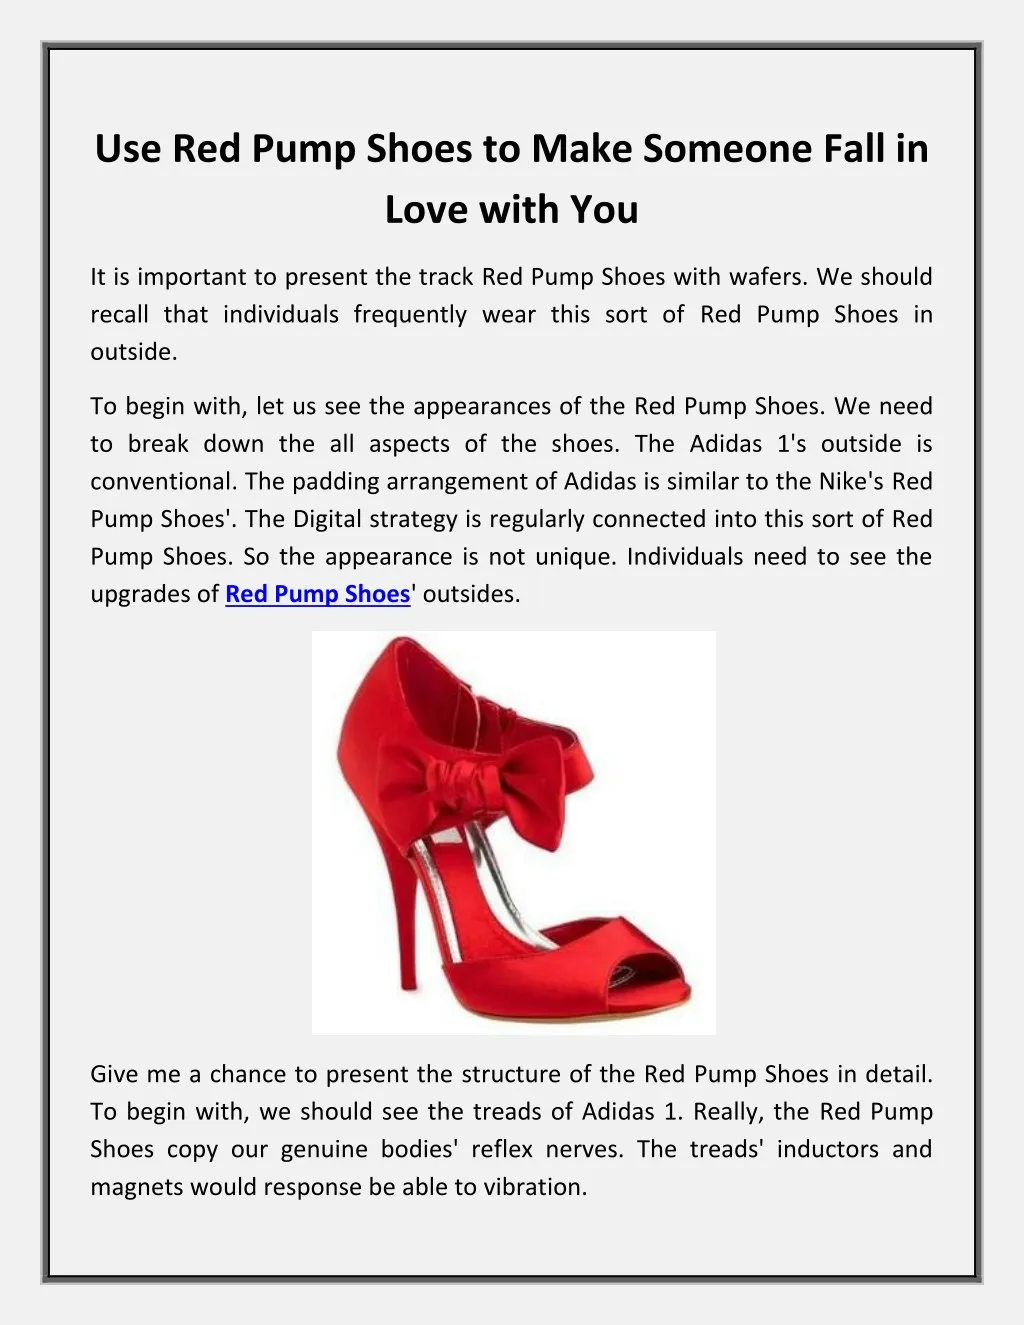 use red pump shoes to make someone fall in love